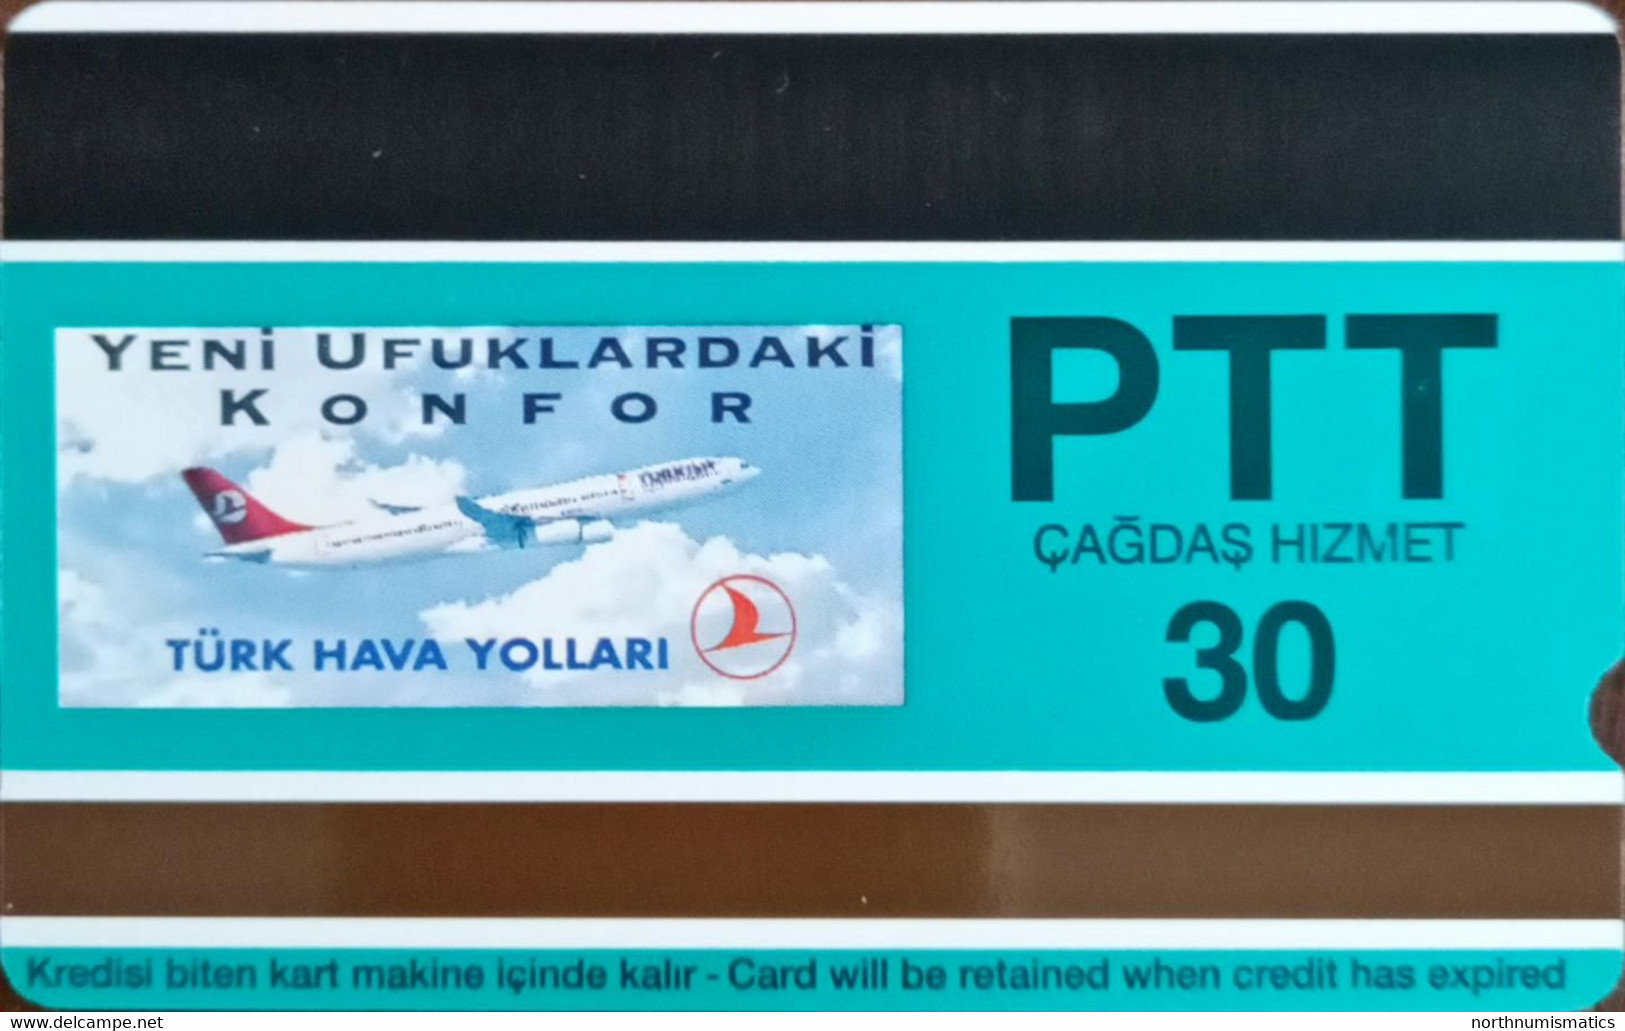 Turkey Phonecards THY Aircafts RJ 100 PTT 30 Units Unc - Lots - Collections